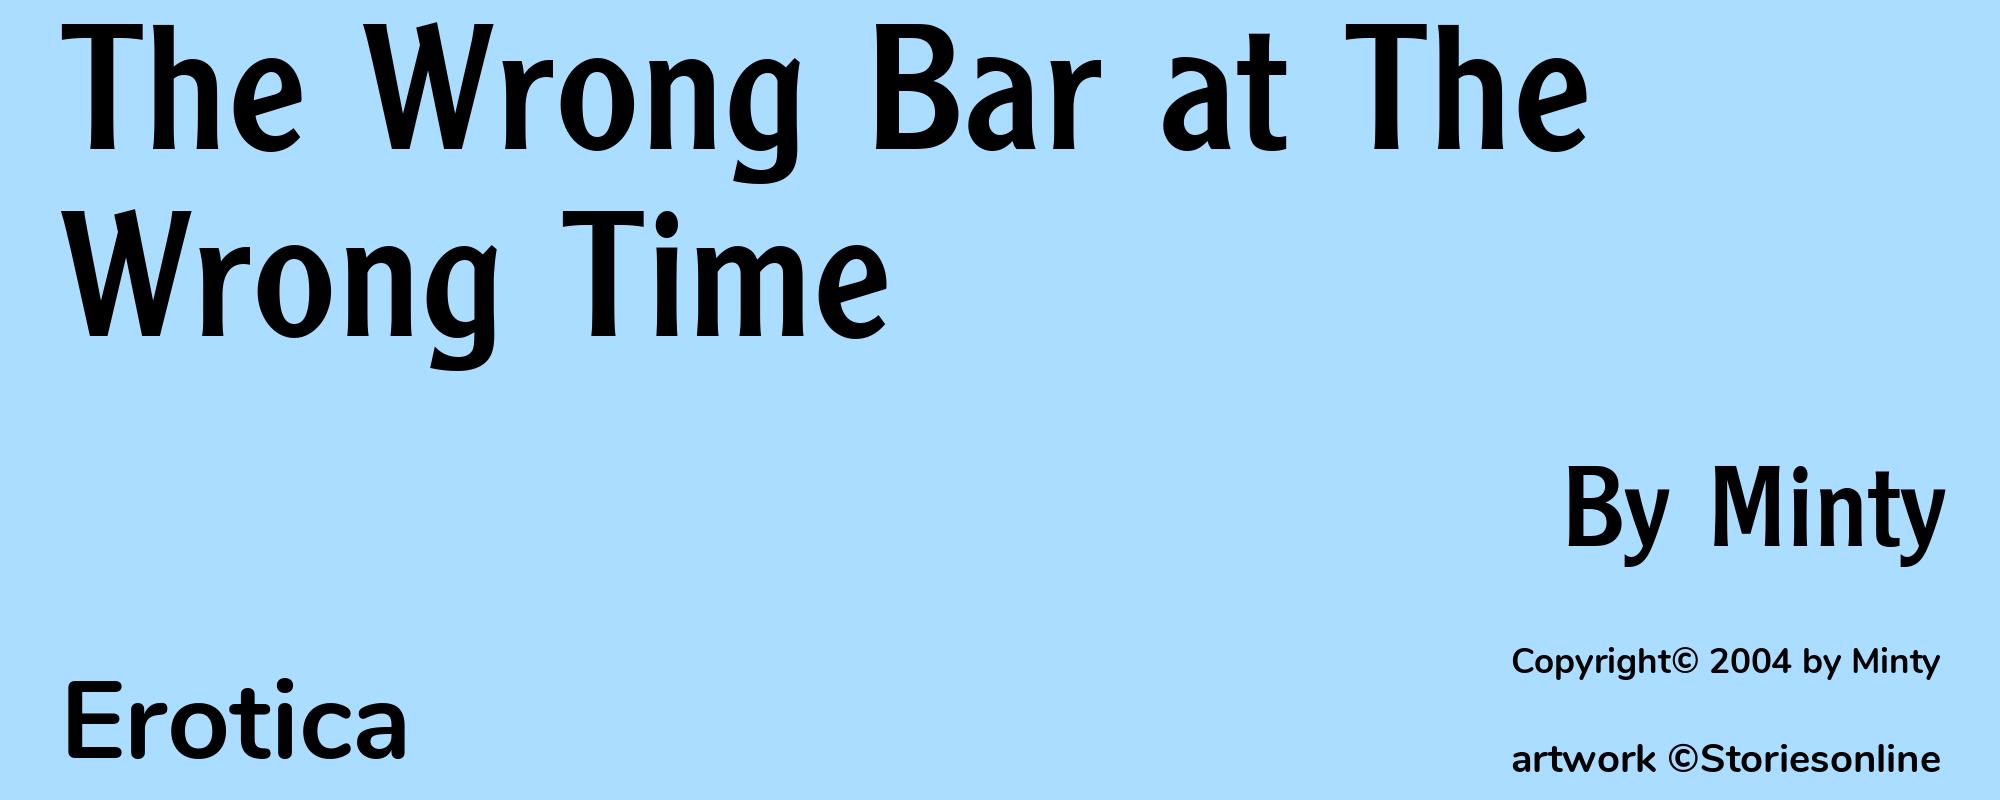 The Wrong Bar at The Wrong Time - Cover